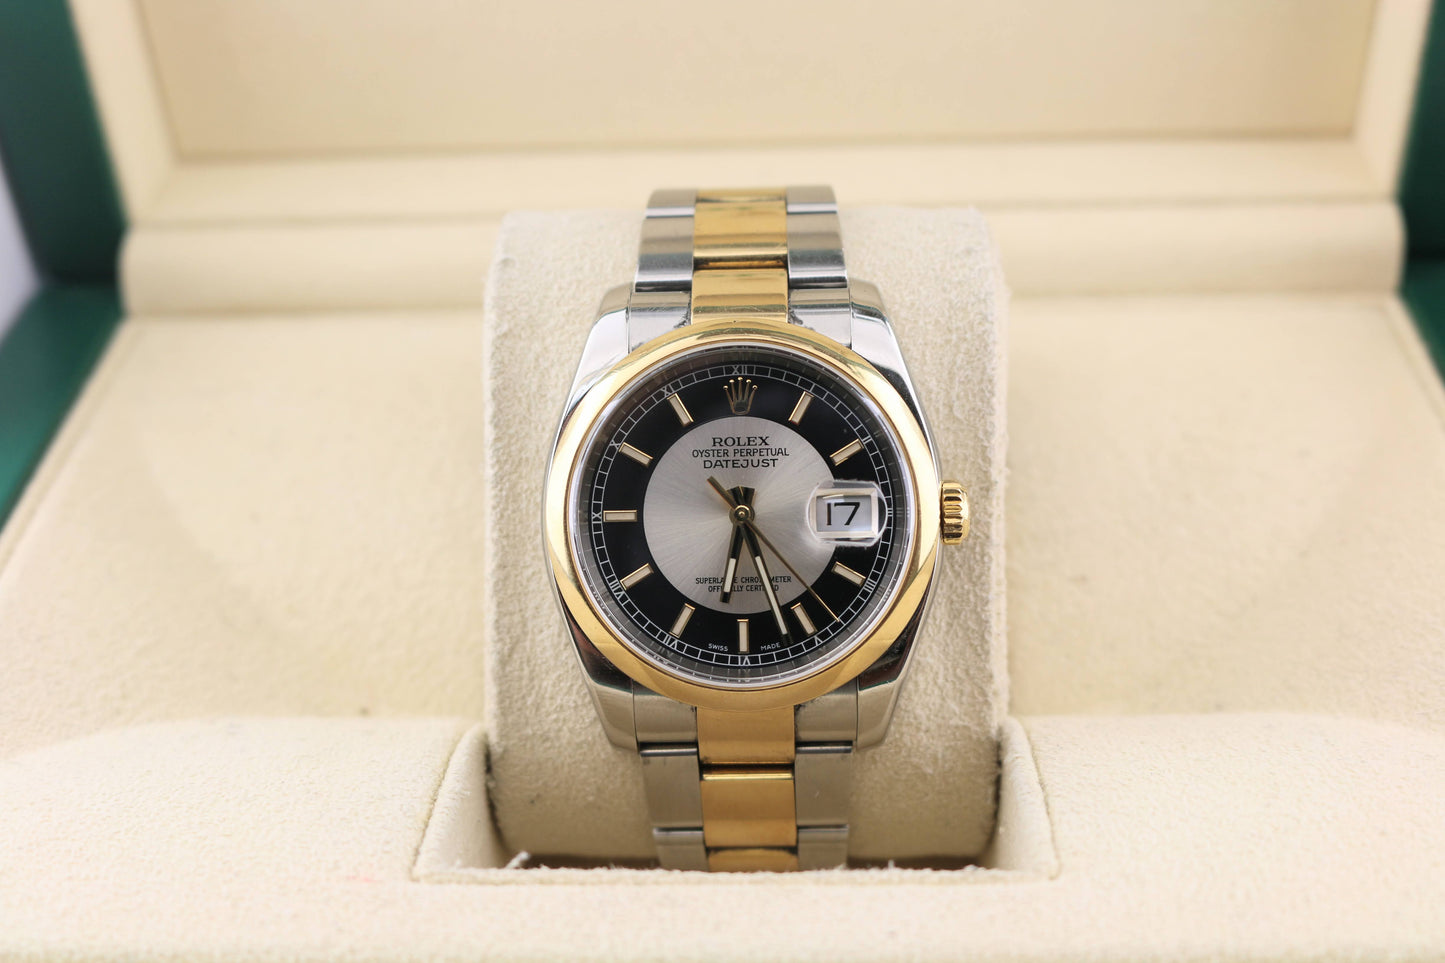 2004 Rolex Datejust 116203 Tuxedo Dial TT Oyster No Papers 36mm